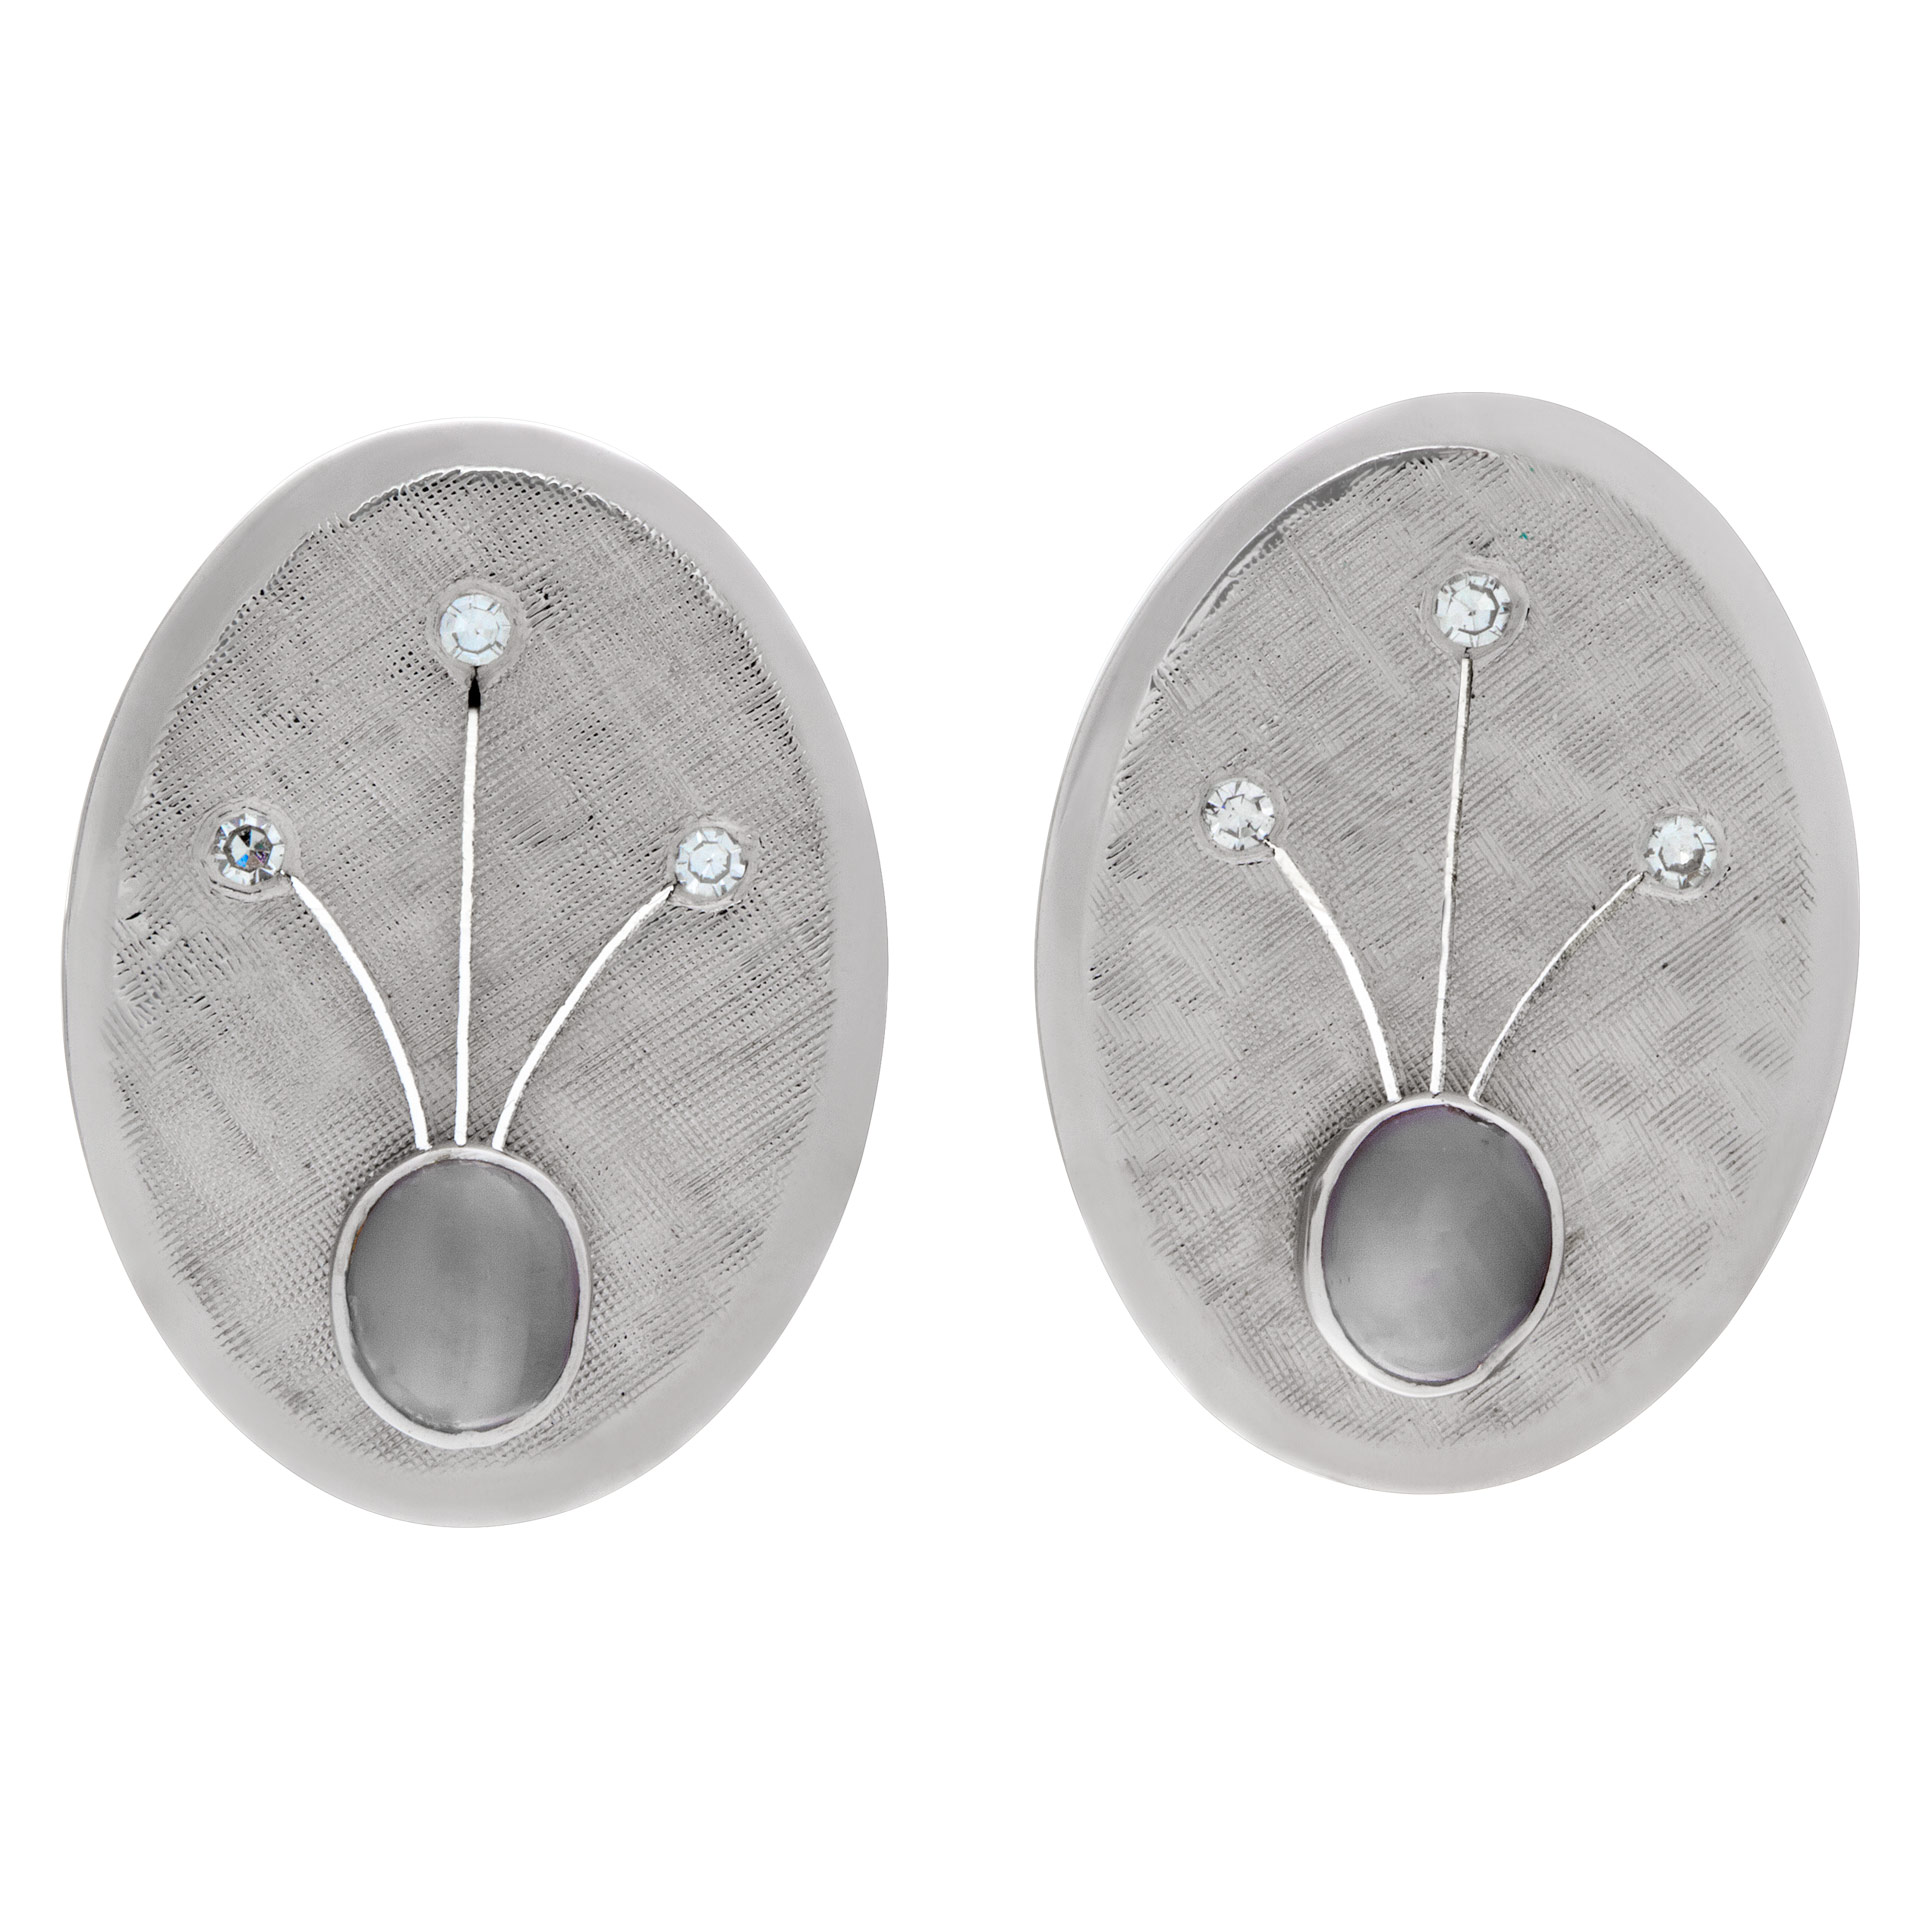 Oval earrings with star sapphire and diamond accents in 14k white gold